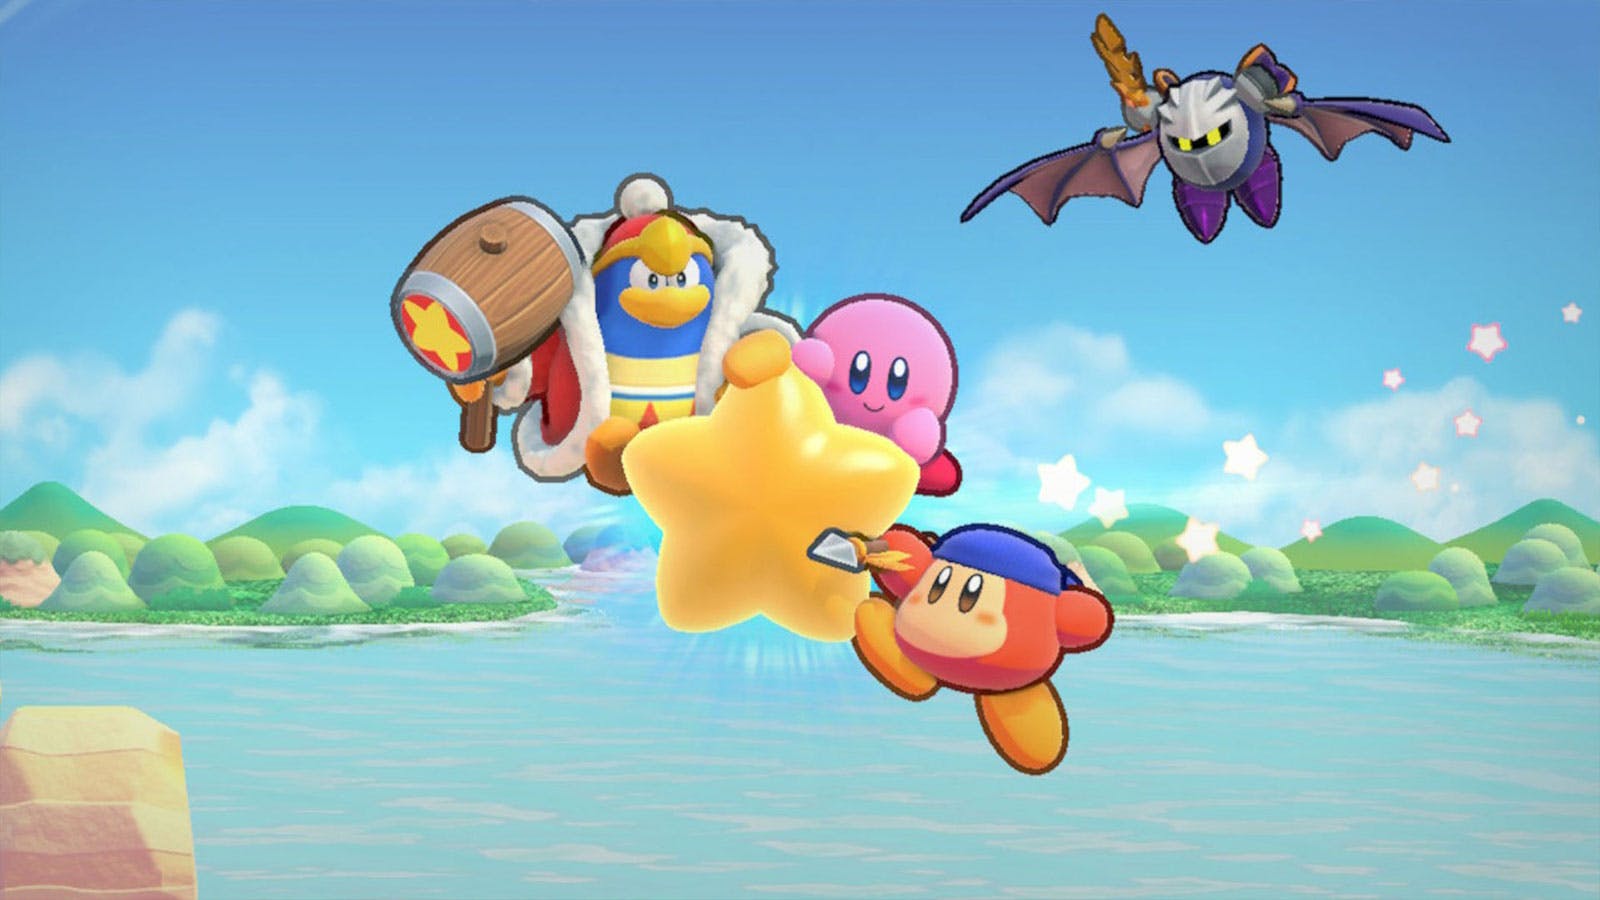 Preview: How Nintendo upgraded 'Kirby's Return to Dream Land Deluxe